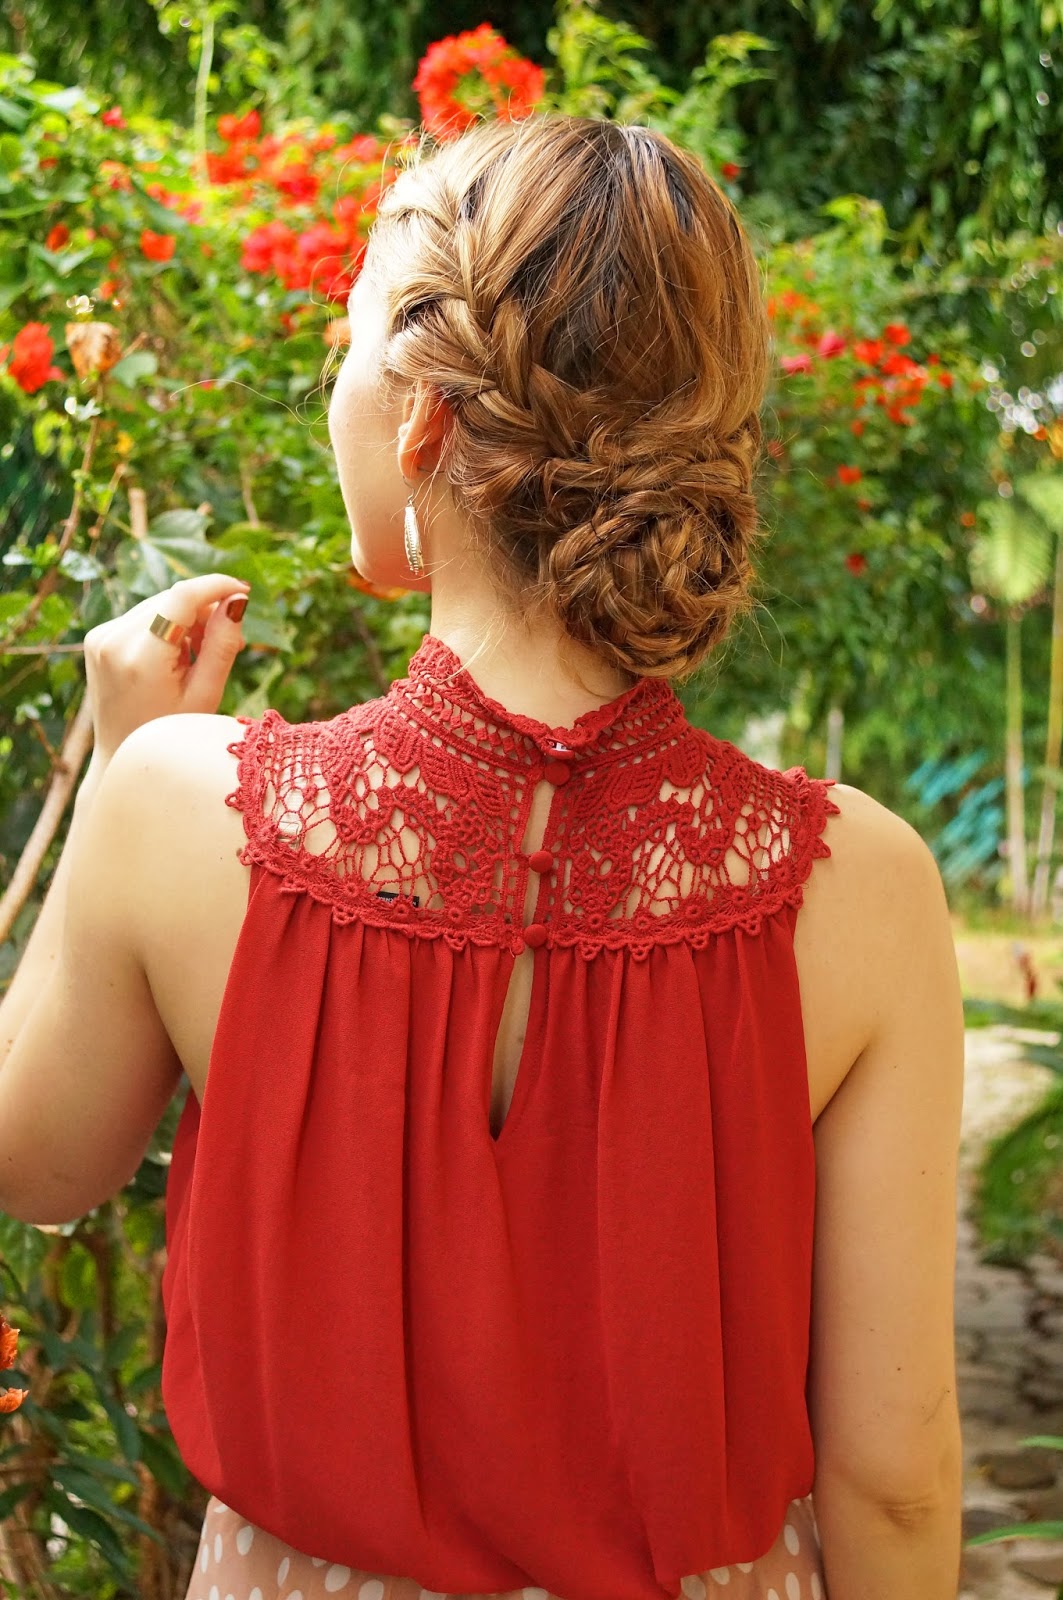 Gorgeous Braided Updo Hairstyle. This would be great for a Summer wedding!